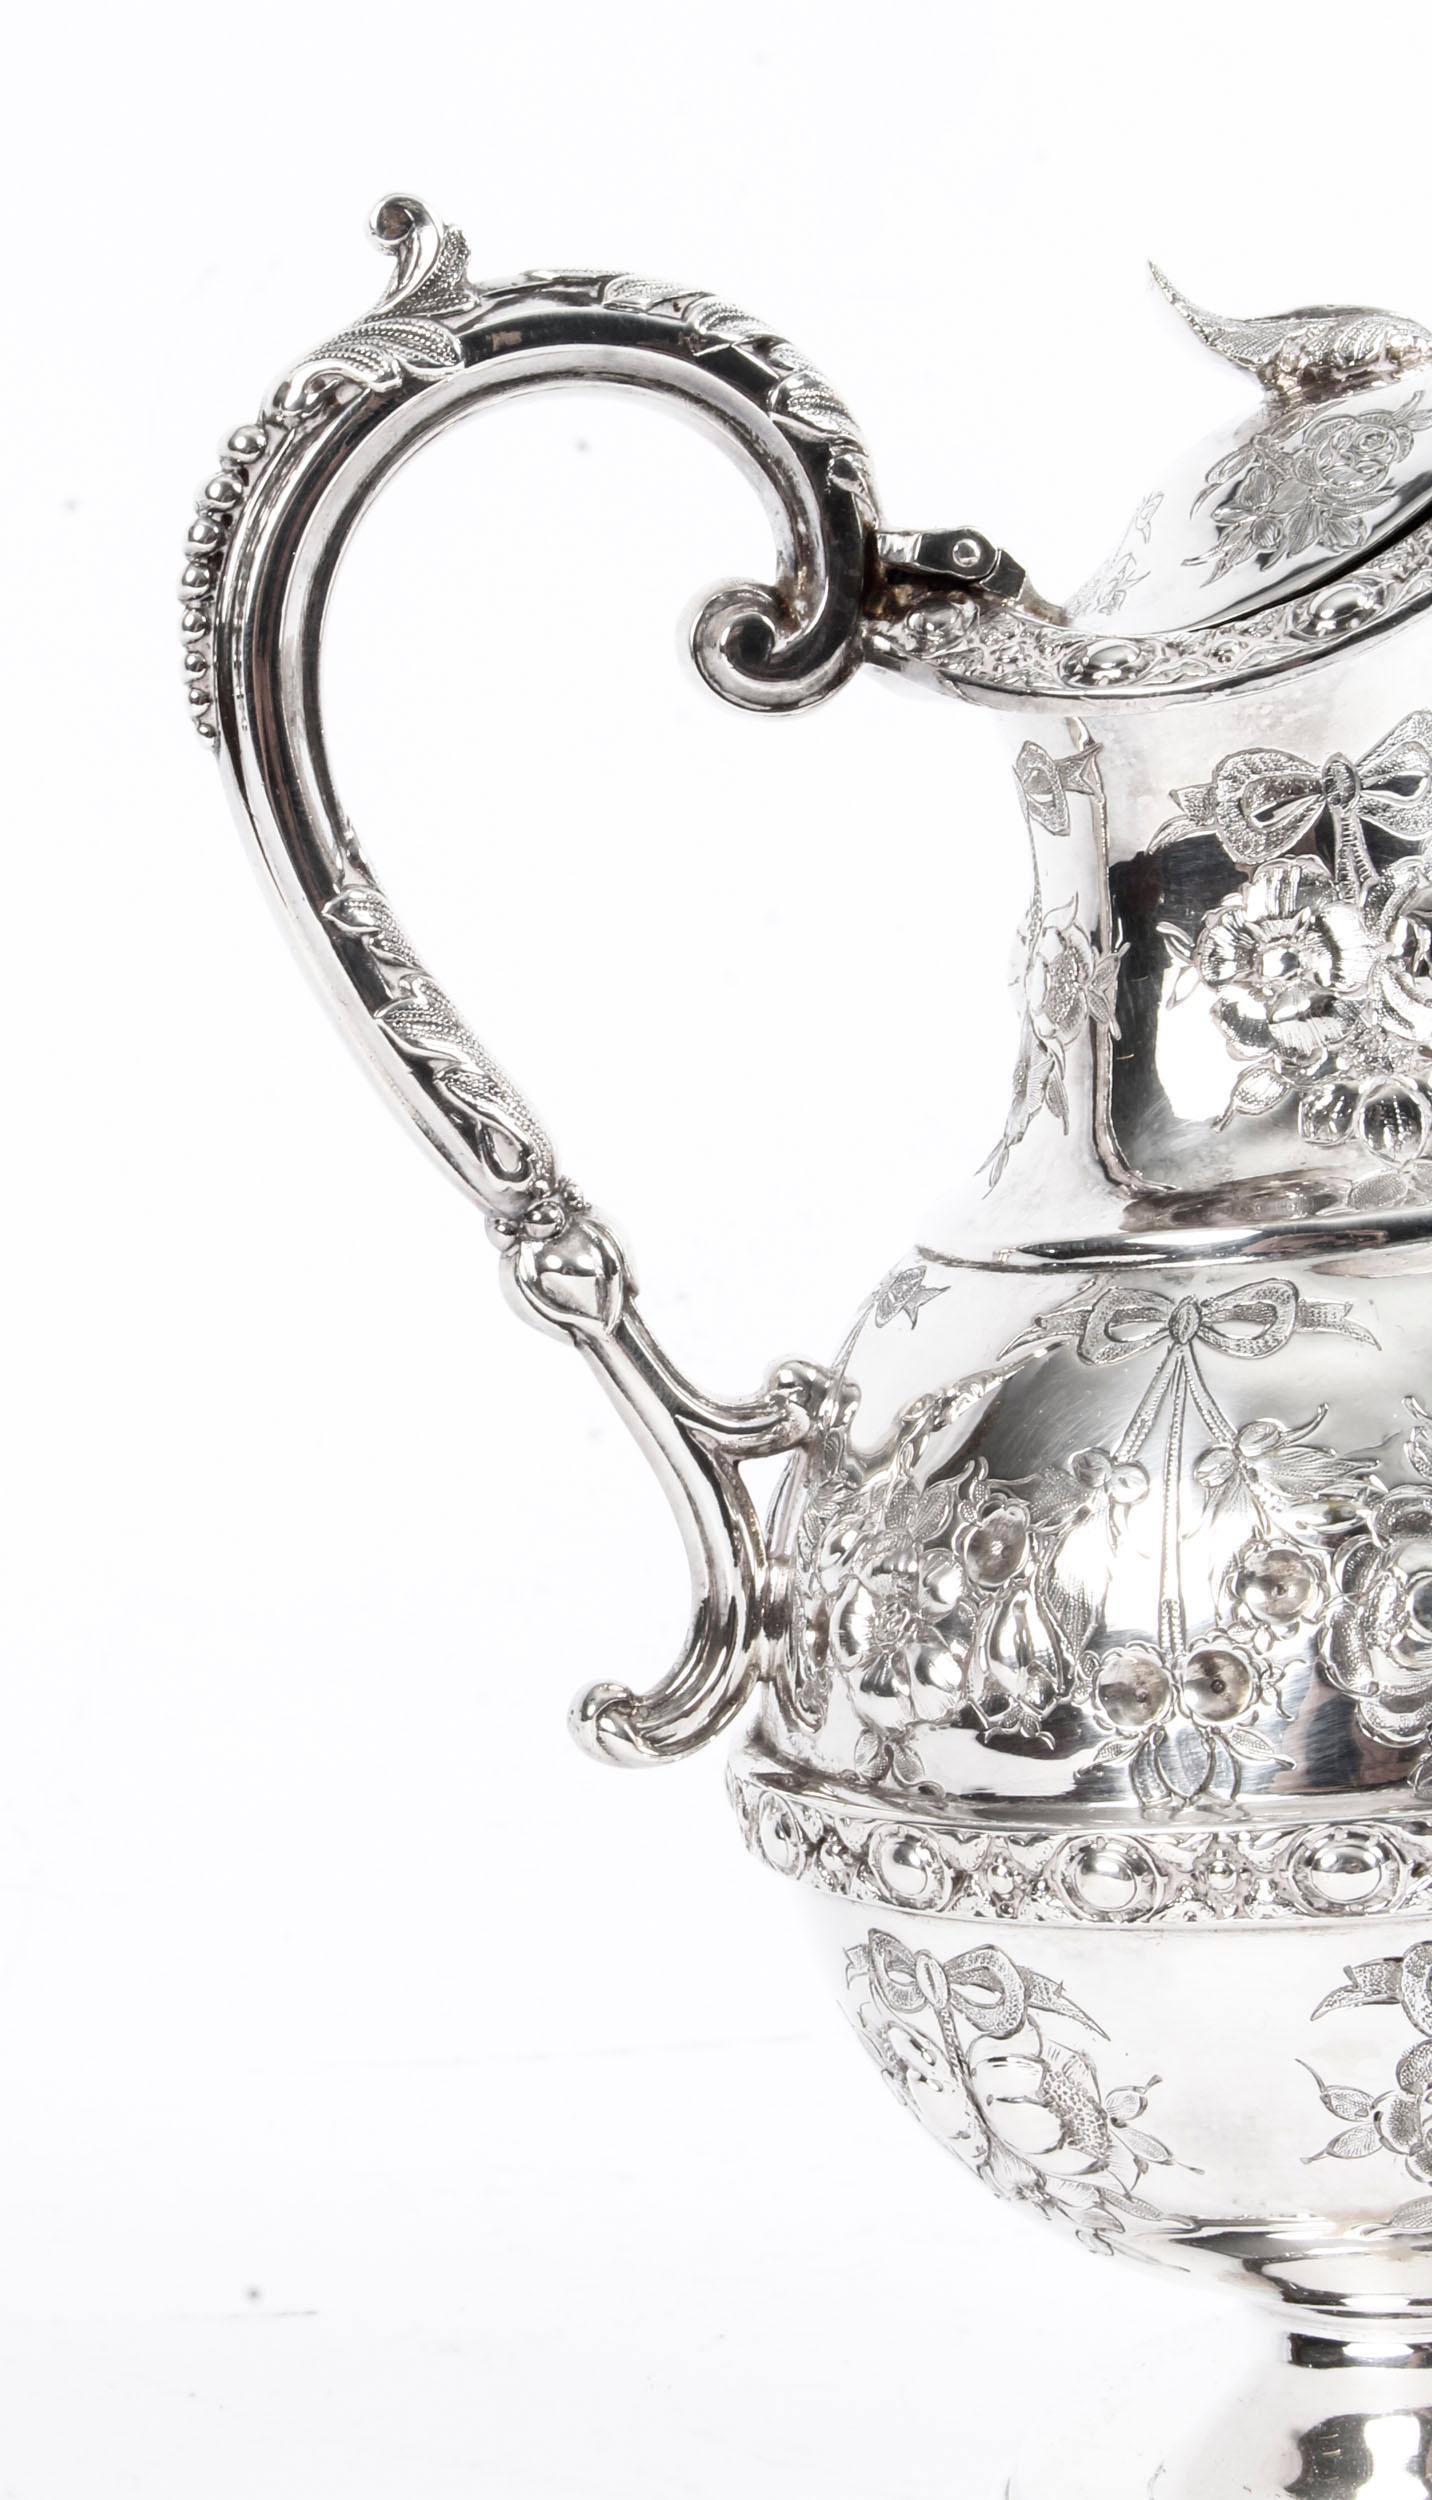 Antique Victorian Silver Plate Claret Jug by Martin Hall, 19th Century 1